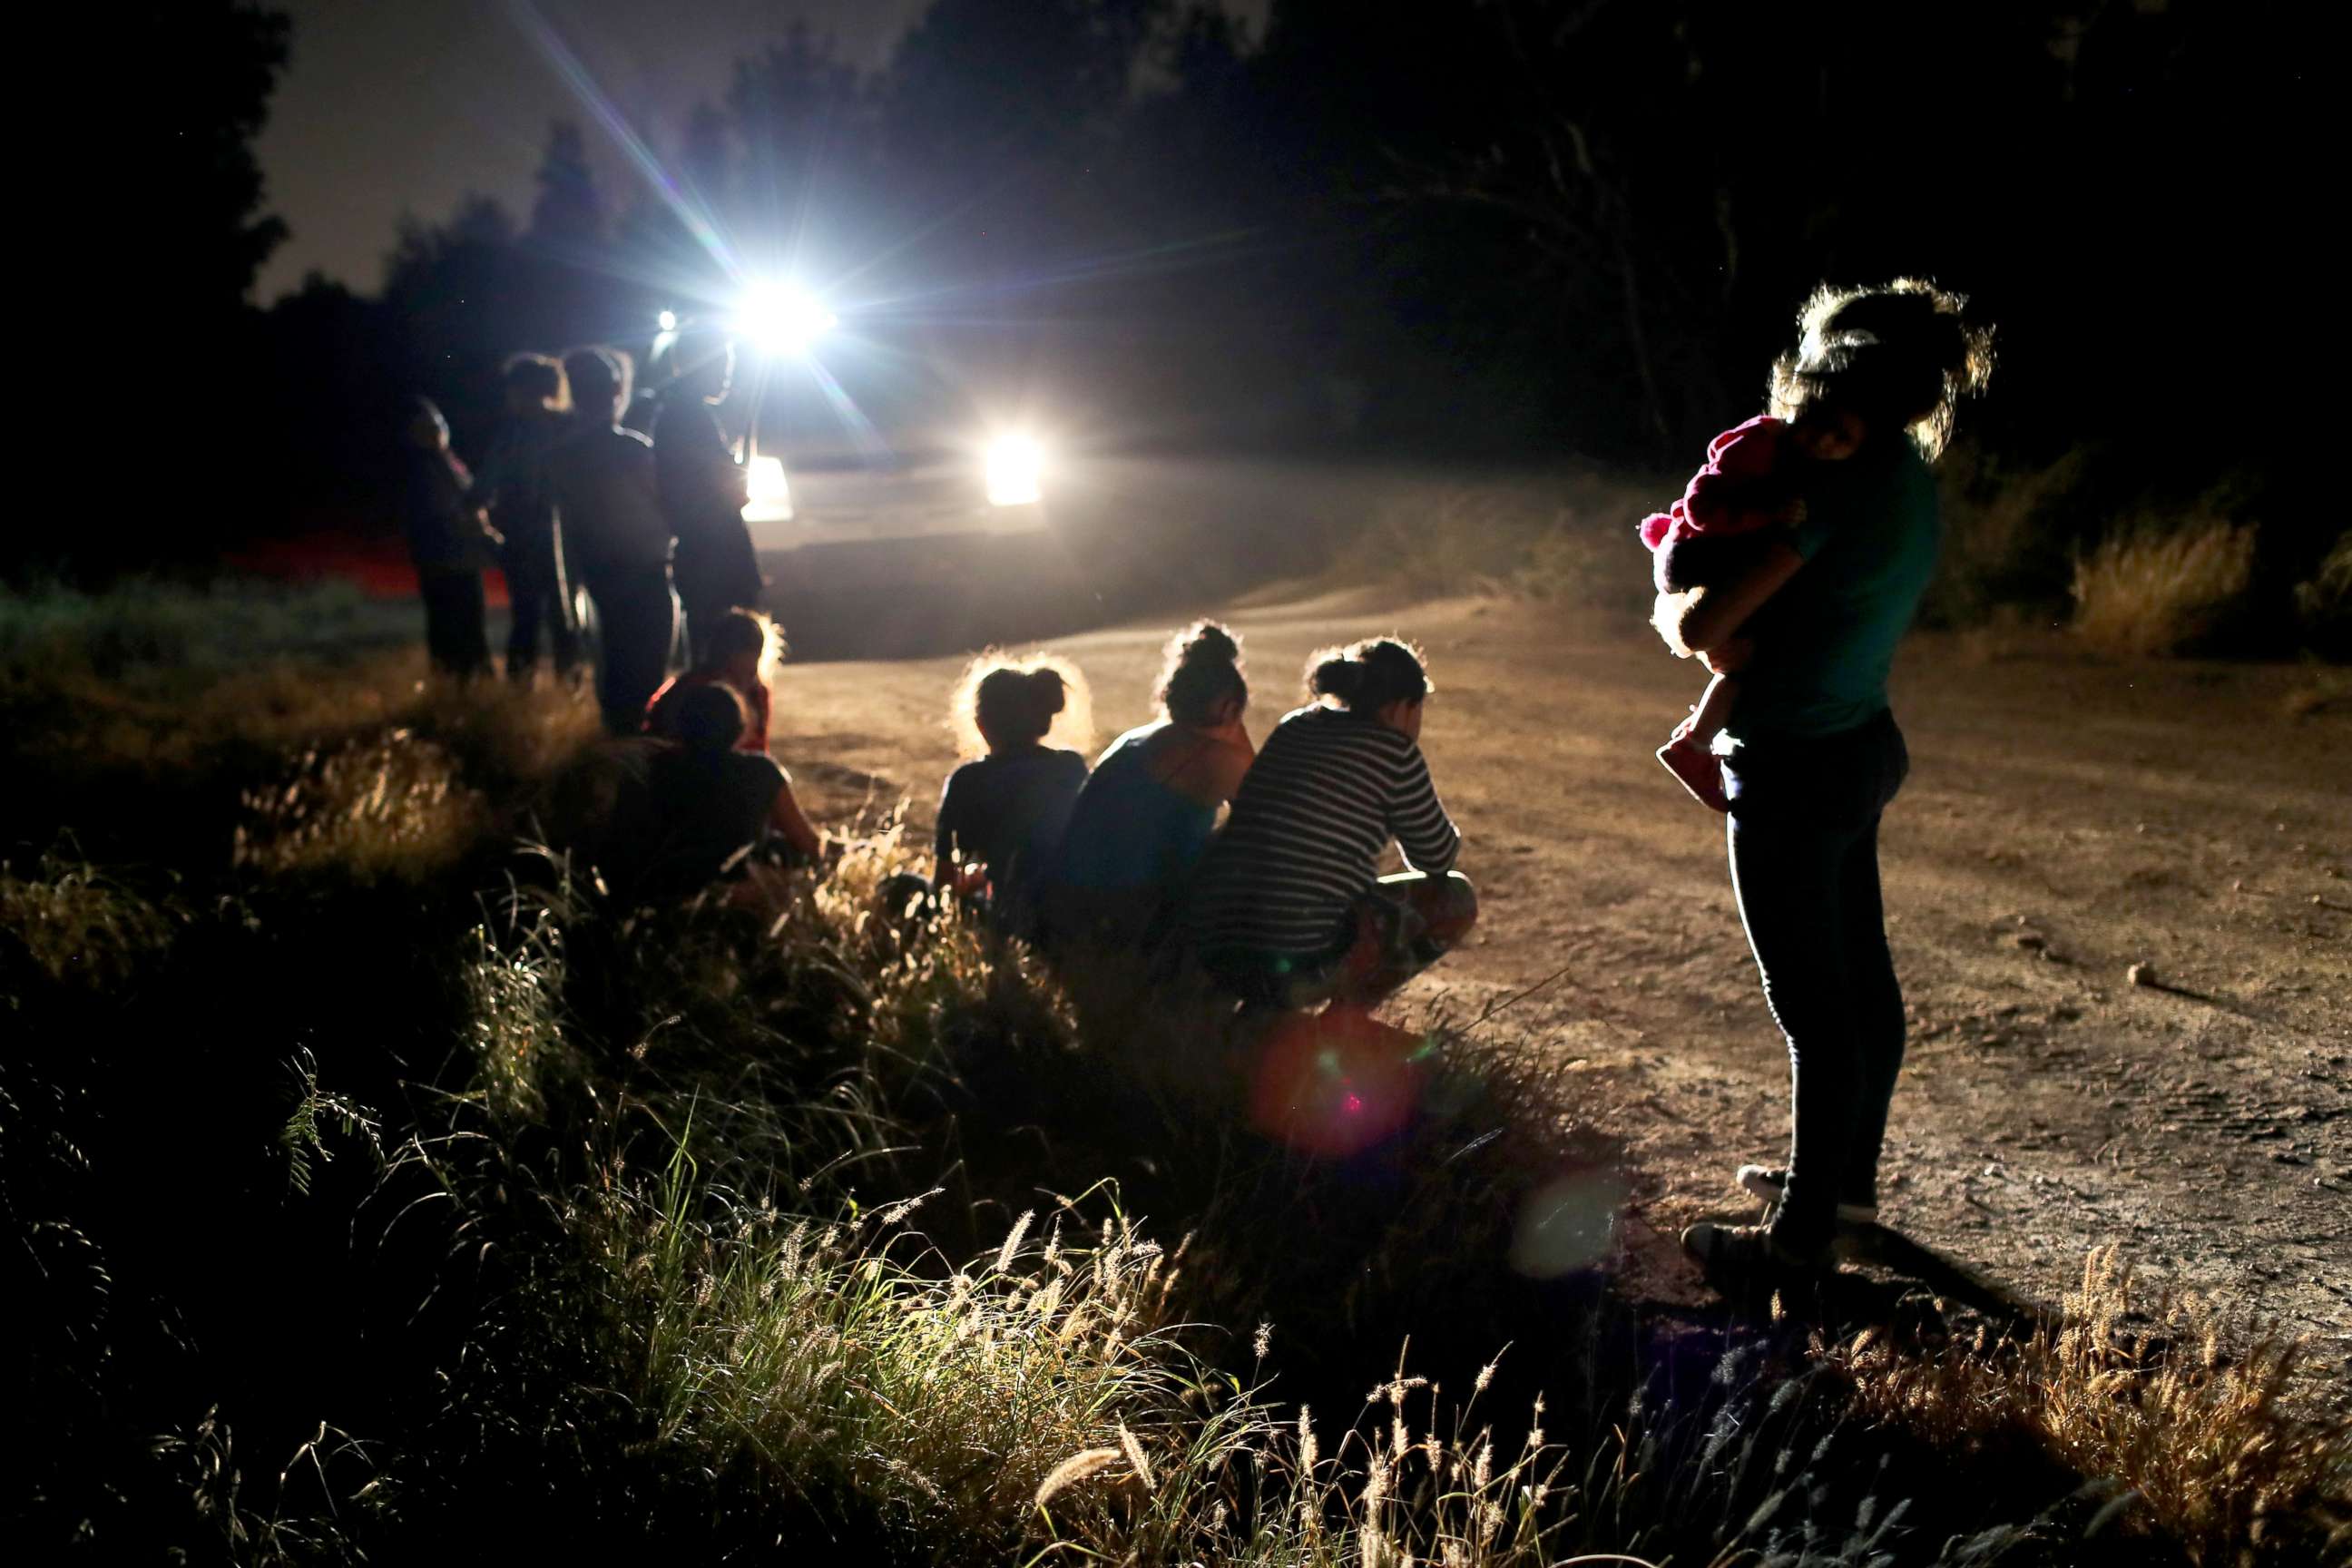 PHOTO: U.S. Border Patrol agents arrive to detain a group of Central American asylum seekers near the U.S.-Mexico border, June 12, 2018, in McAllen, Texas.